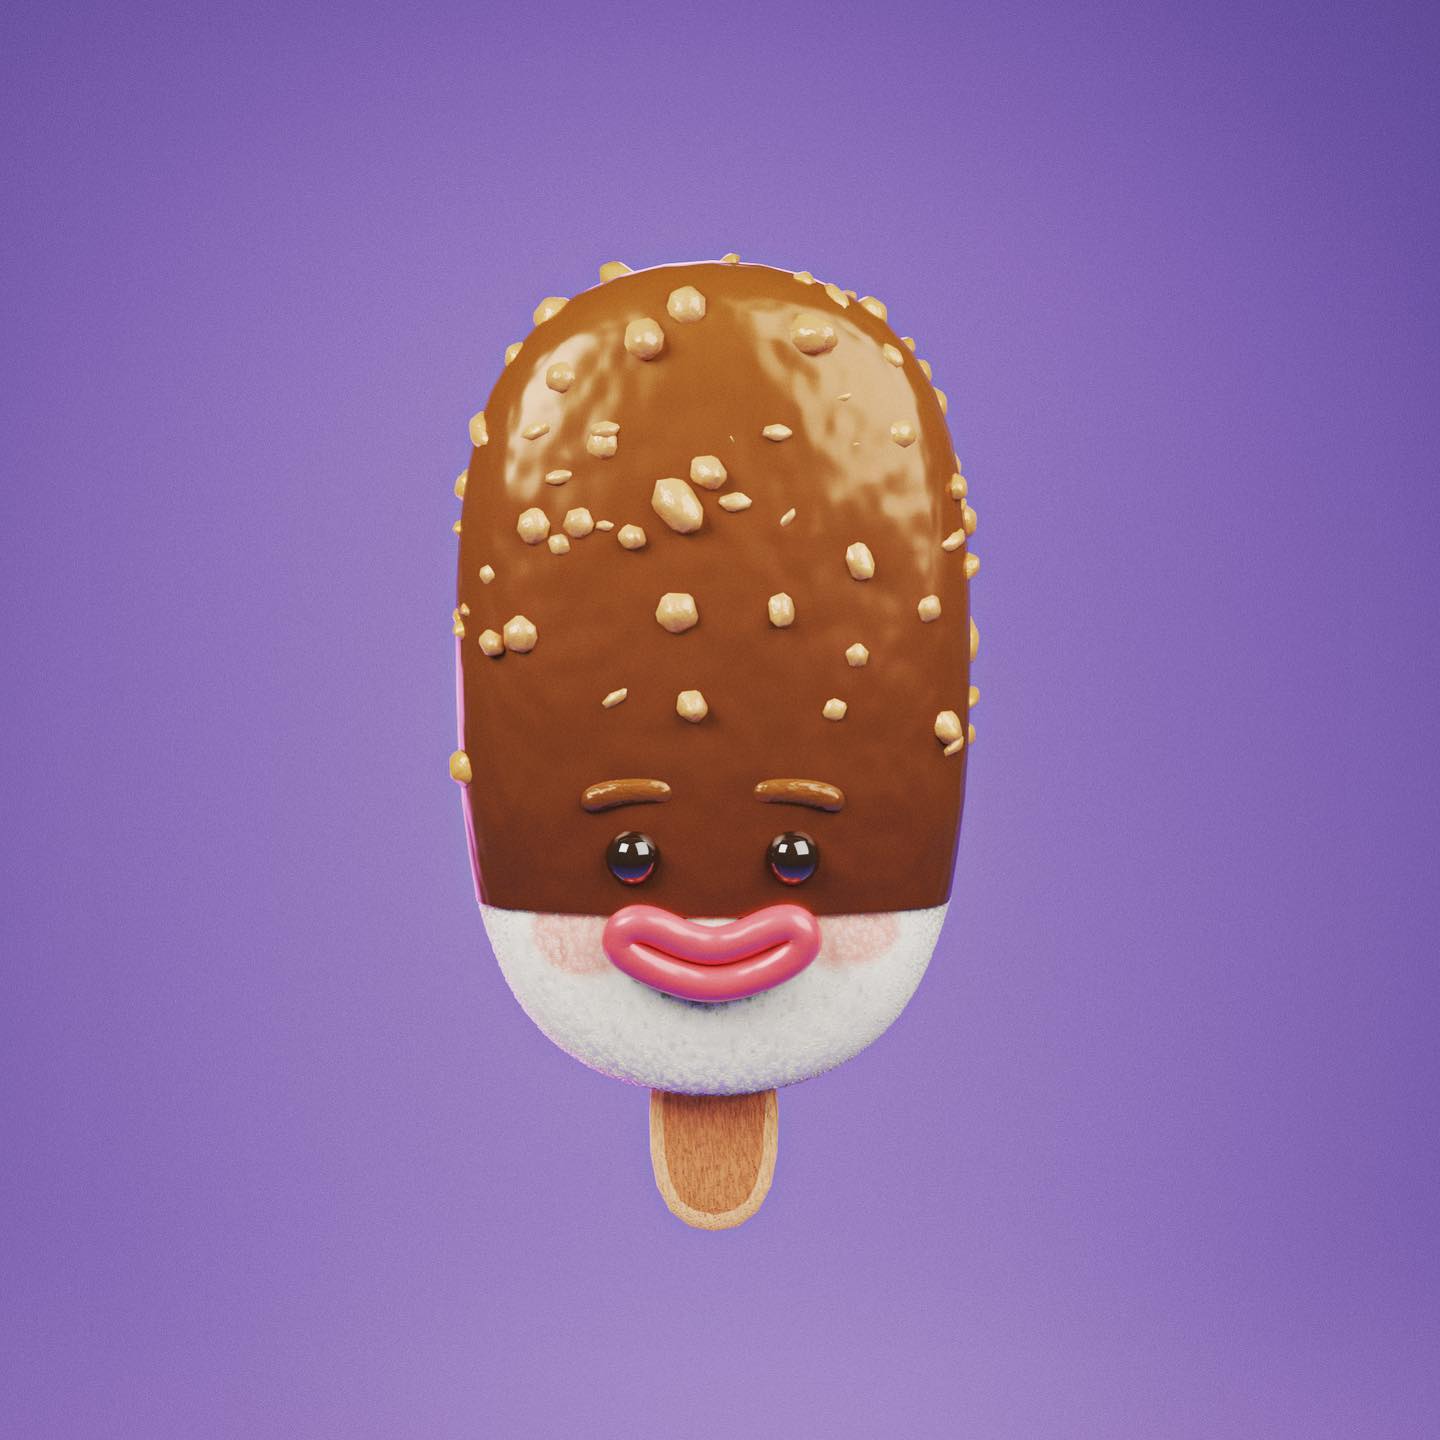 Cute ice cream character with chocolate flavor